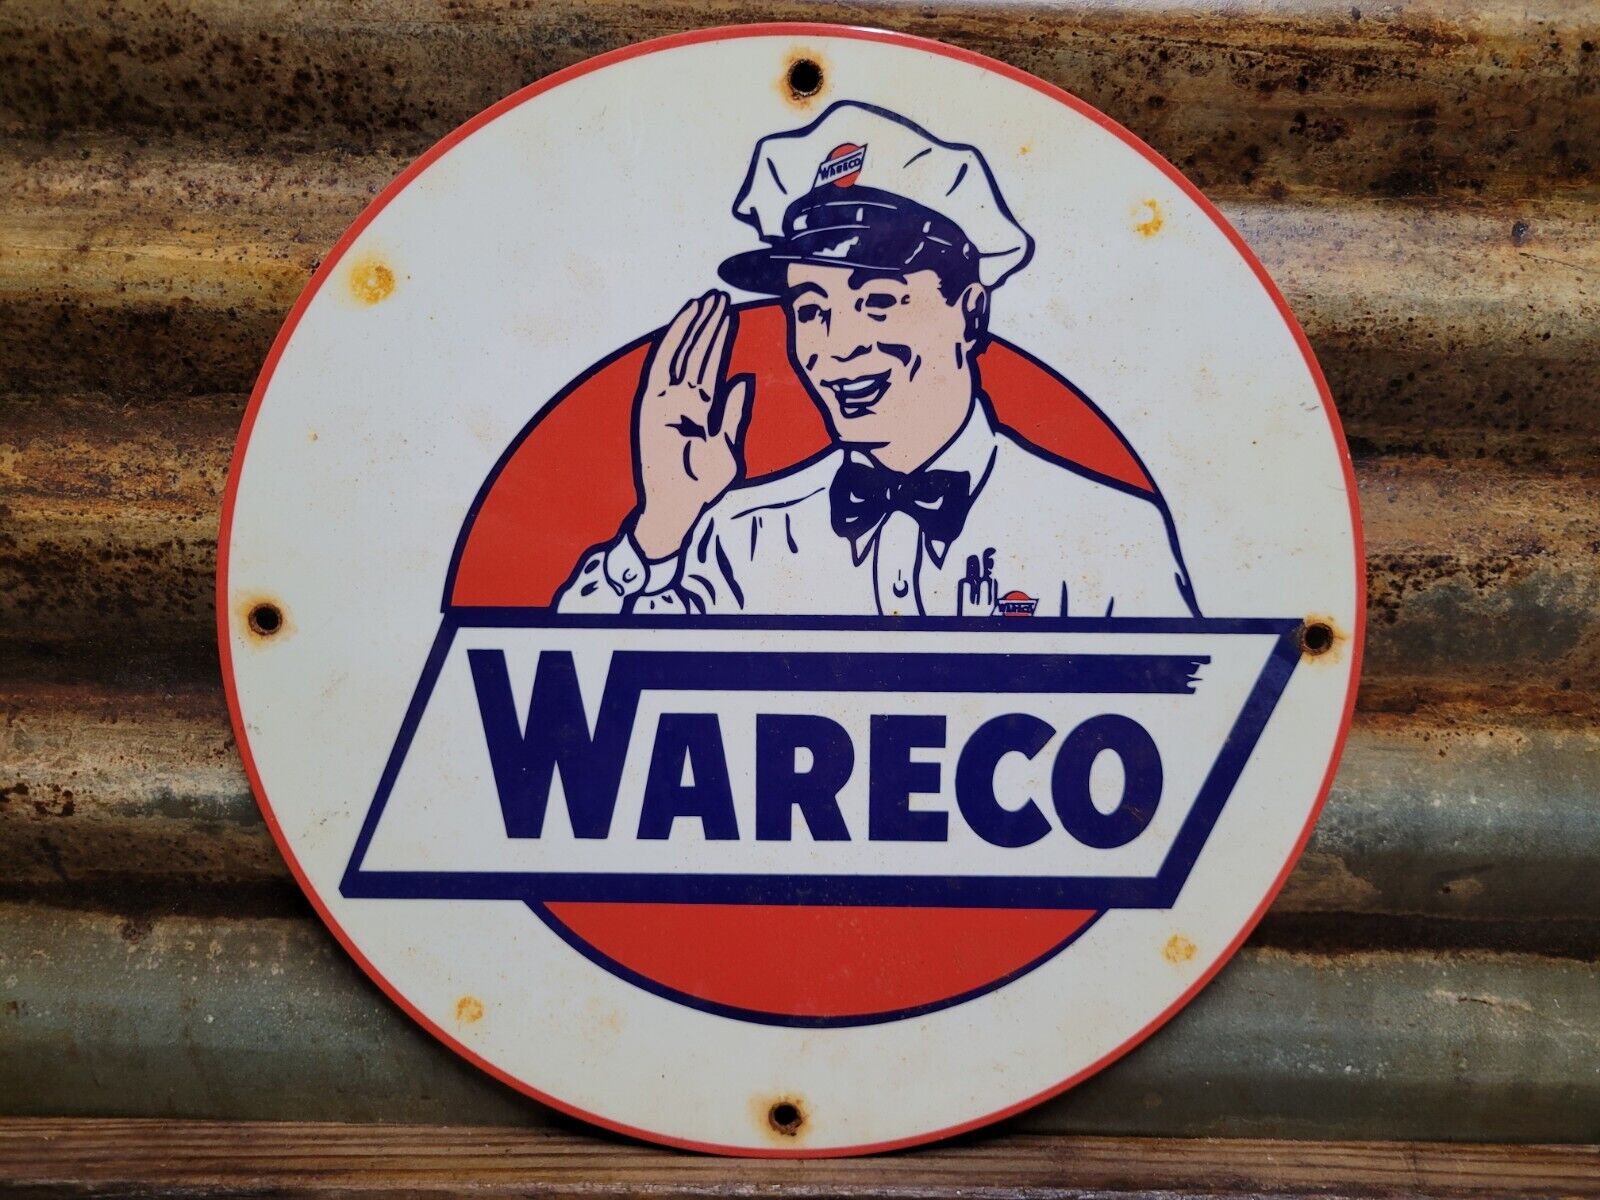 VINTAGE WARECO PORCELAIN SIGN GASOLINE GAS STATION WILLIAM WARE TEXACO PRODUCTS